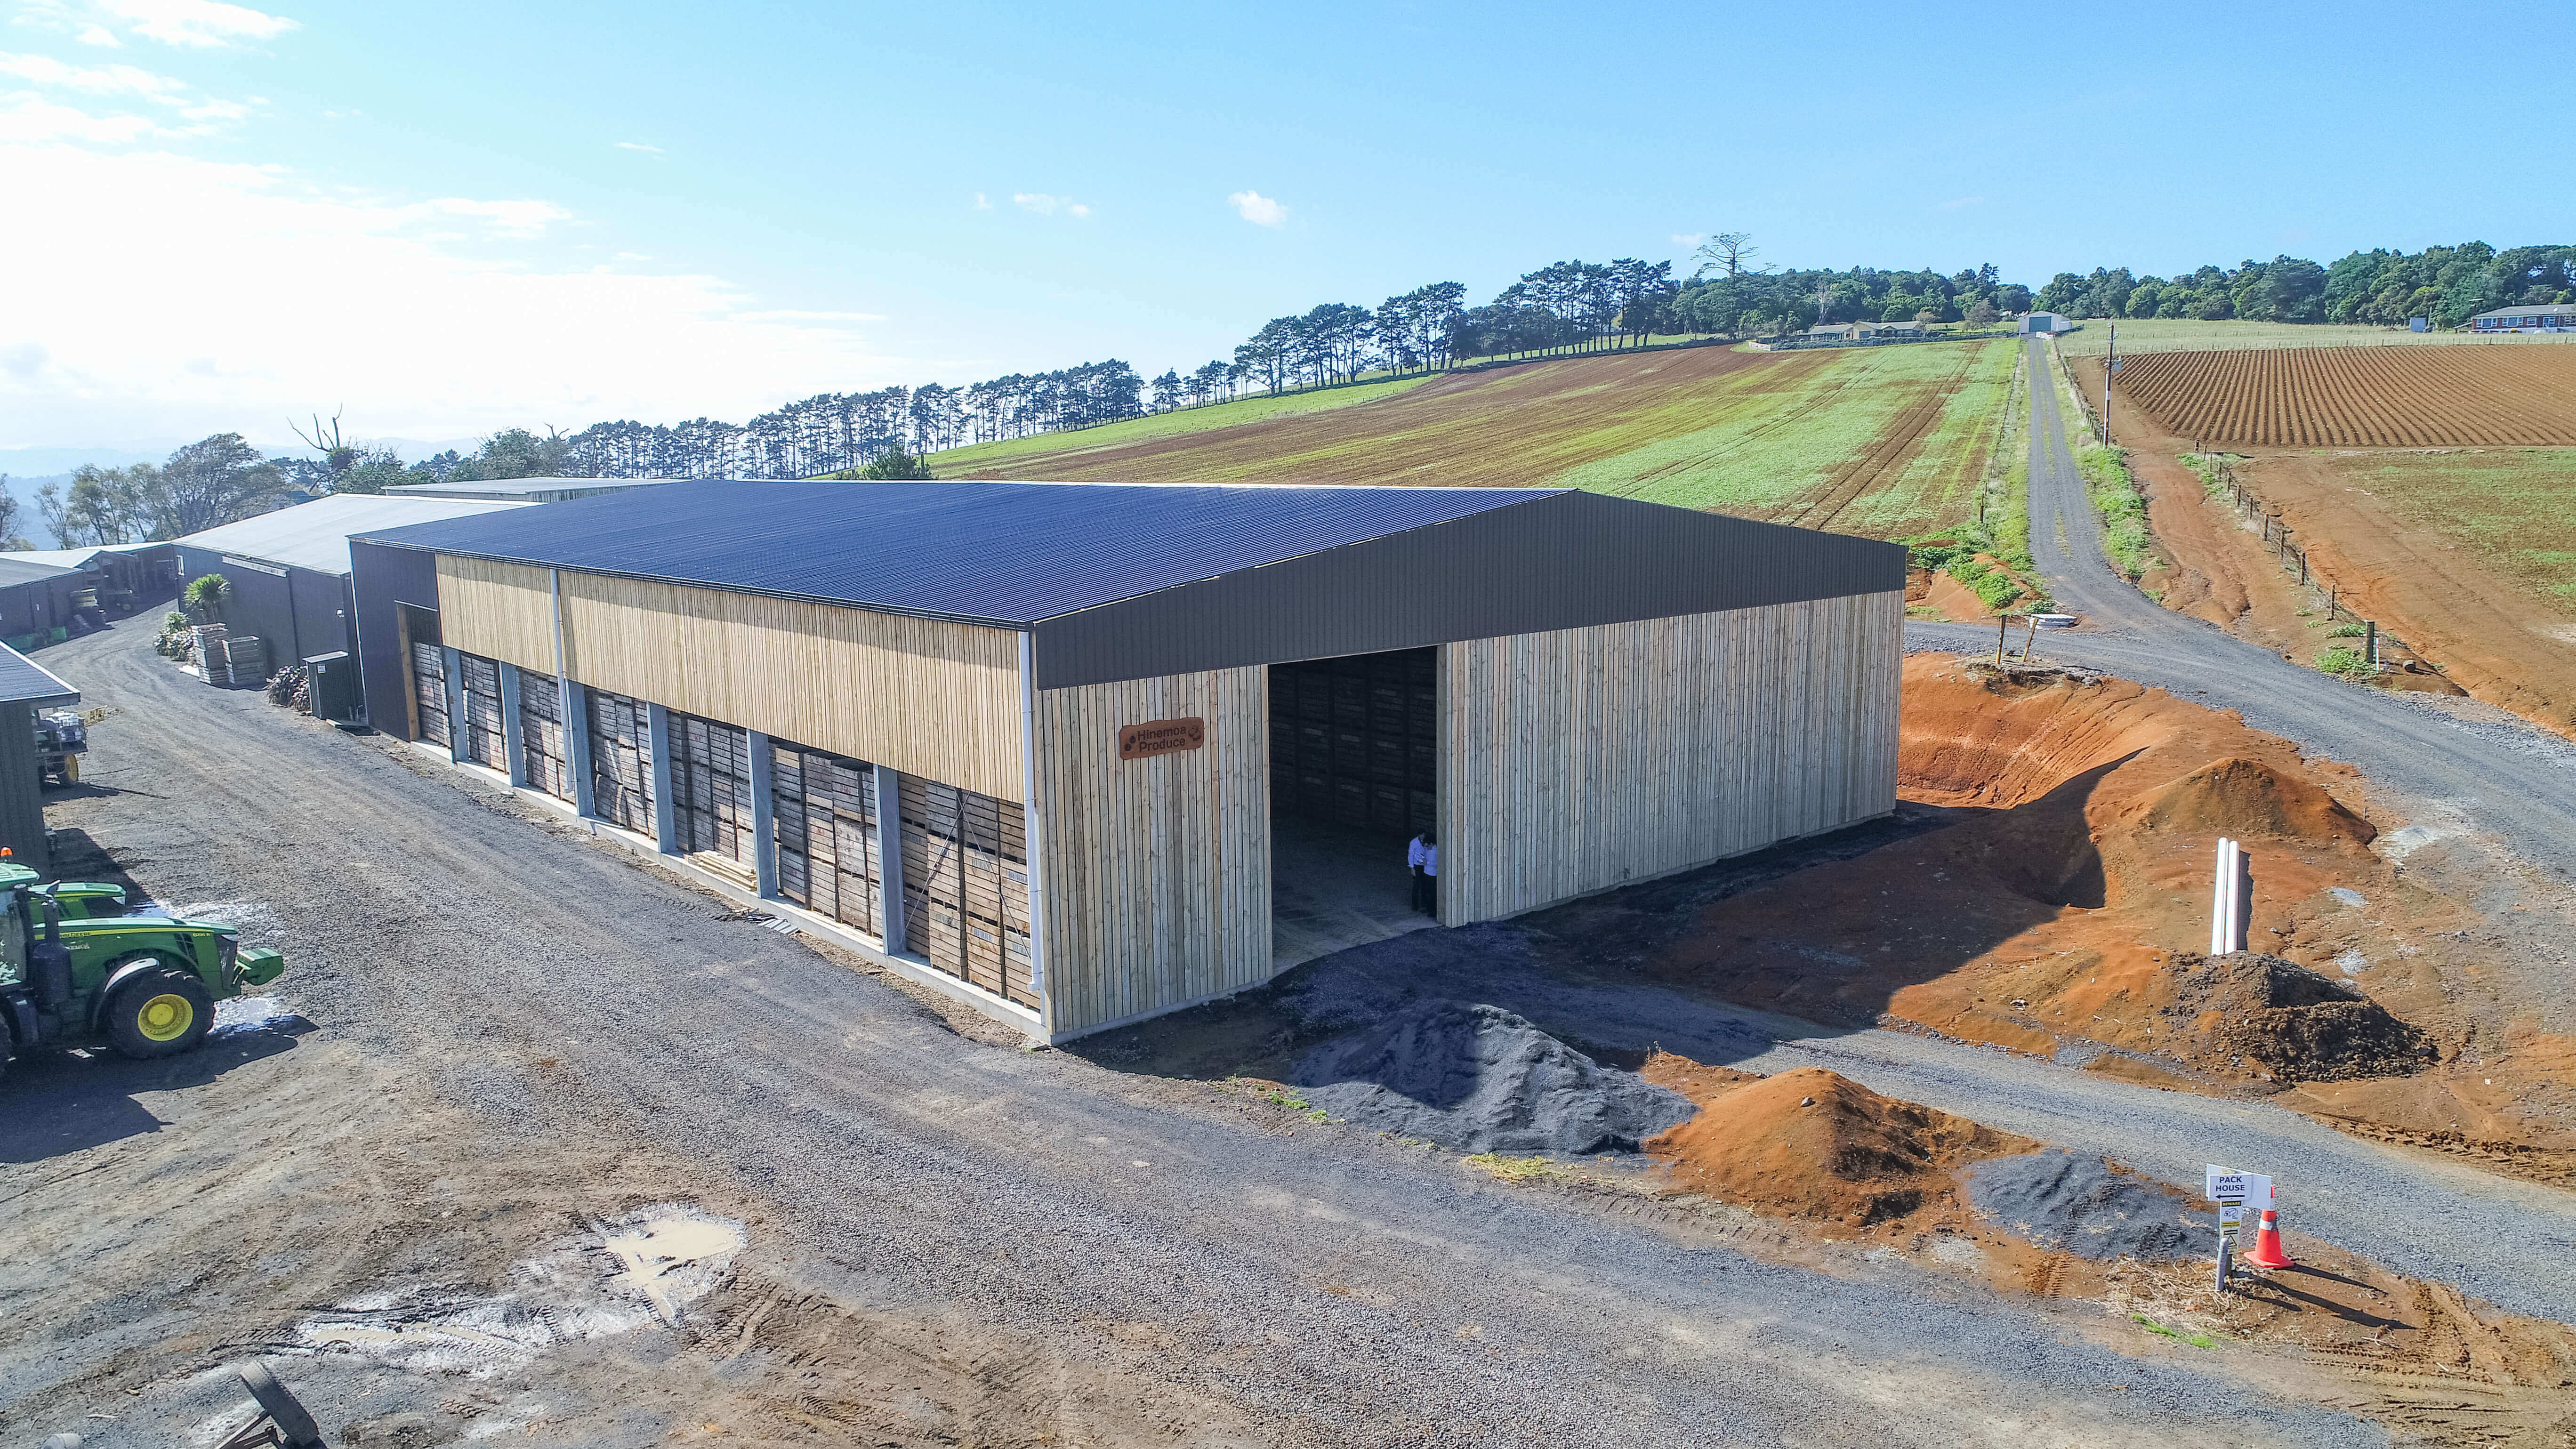 This 27m packing shed is extra large while ensuring quality ventilation and easy access points